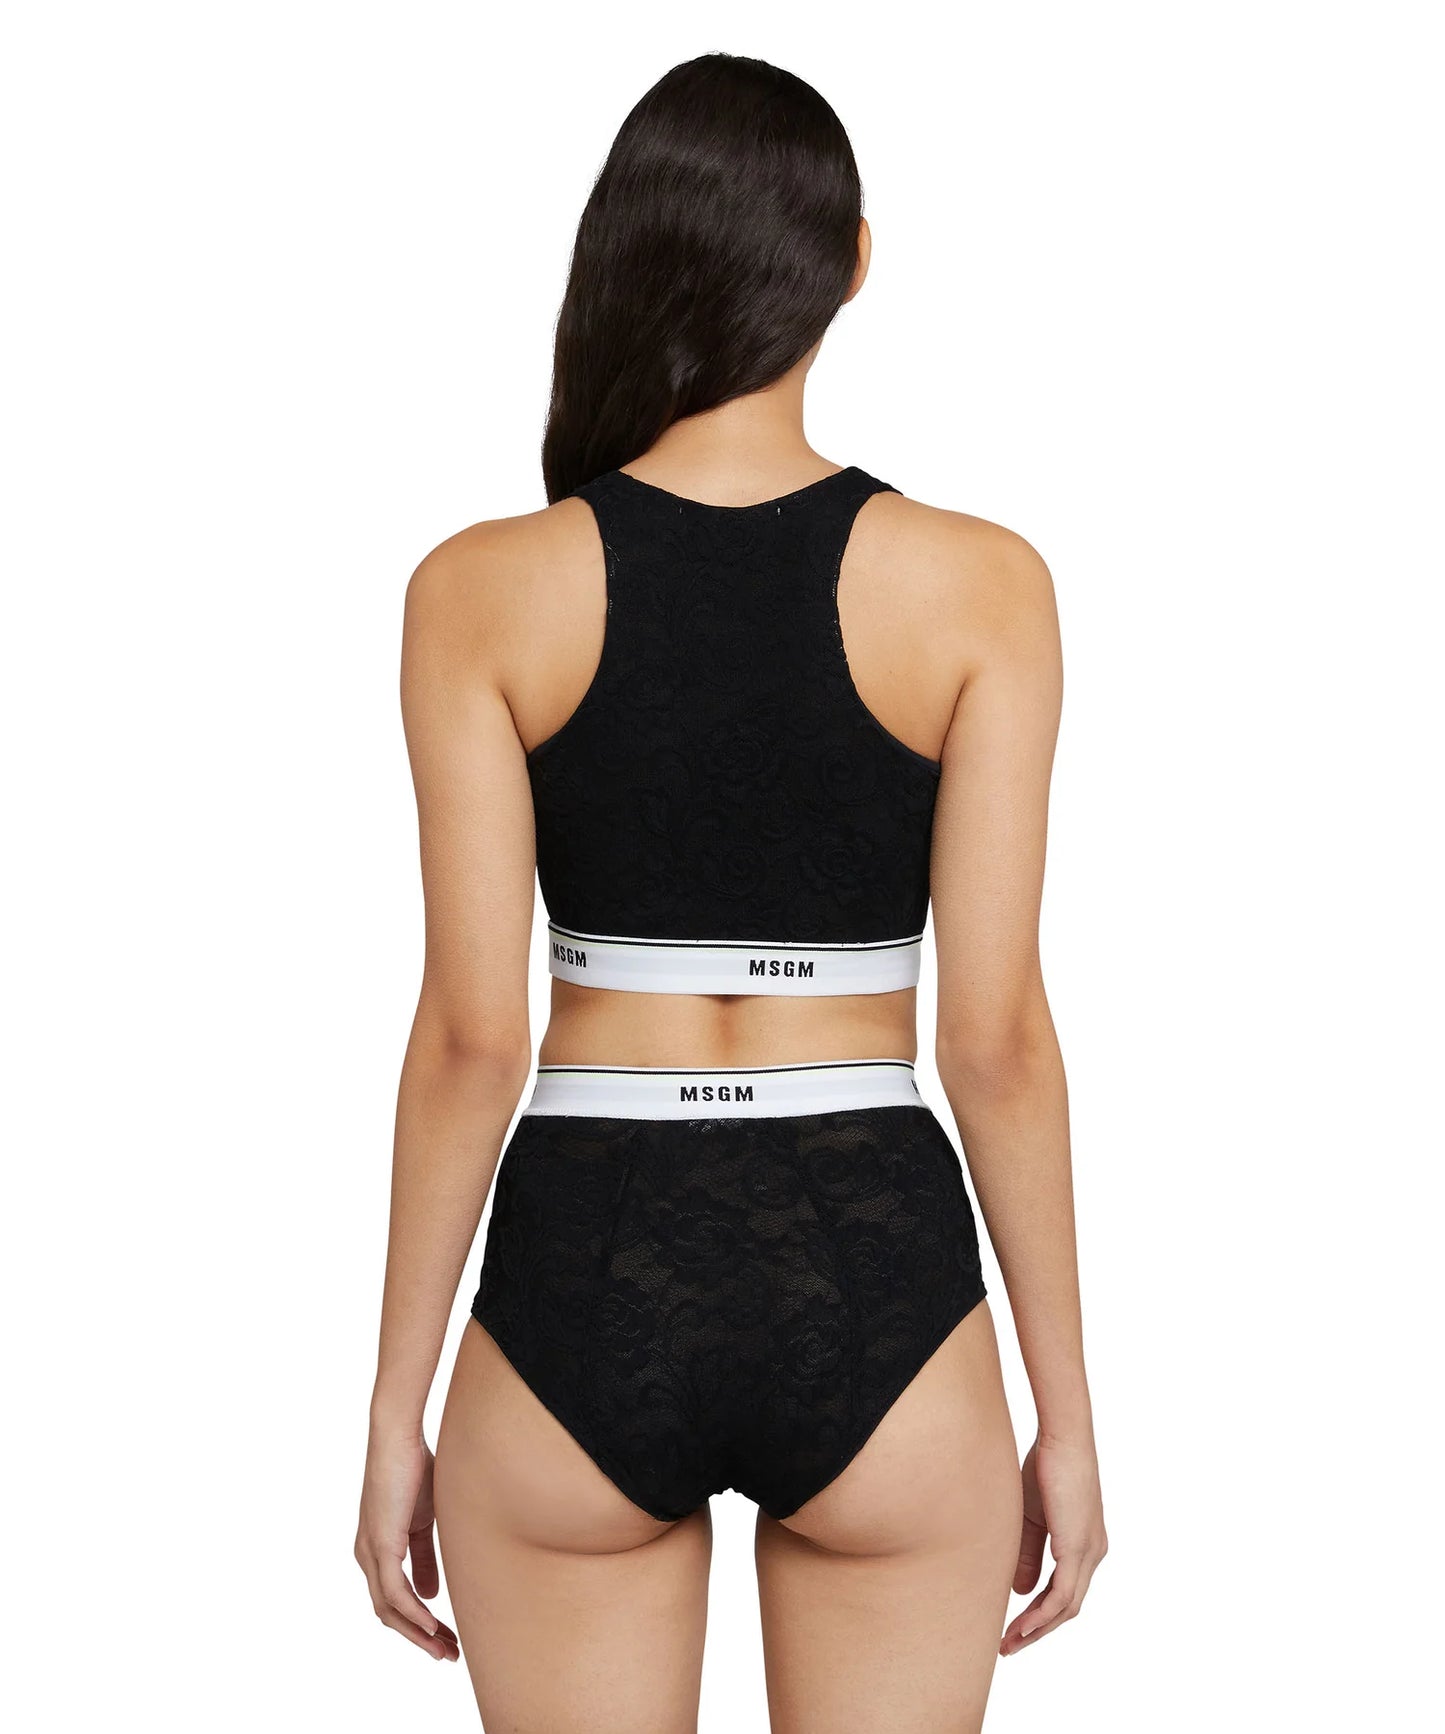 Lace Brassiere with Elastic Band